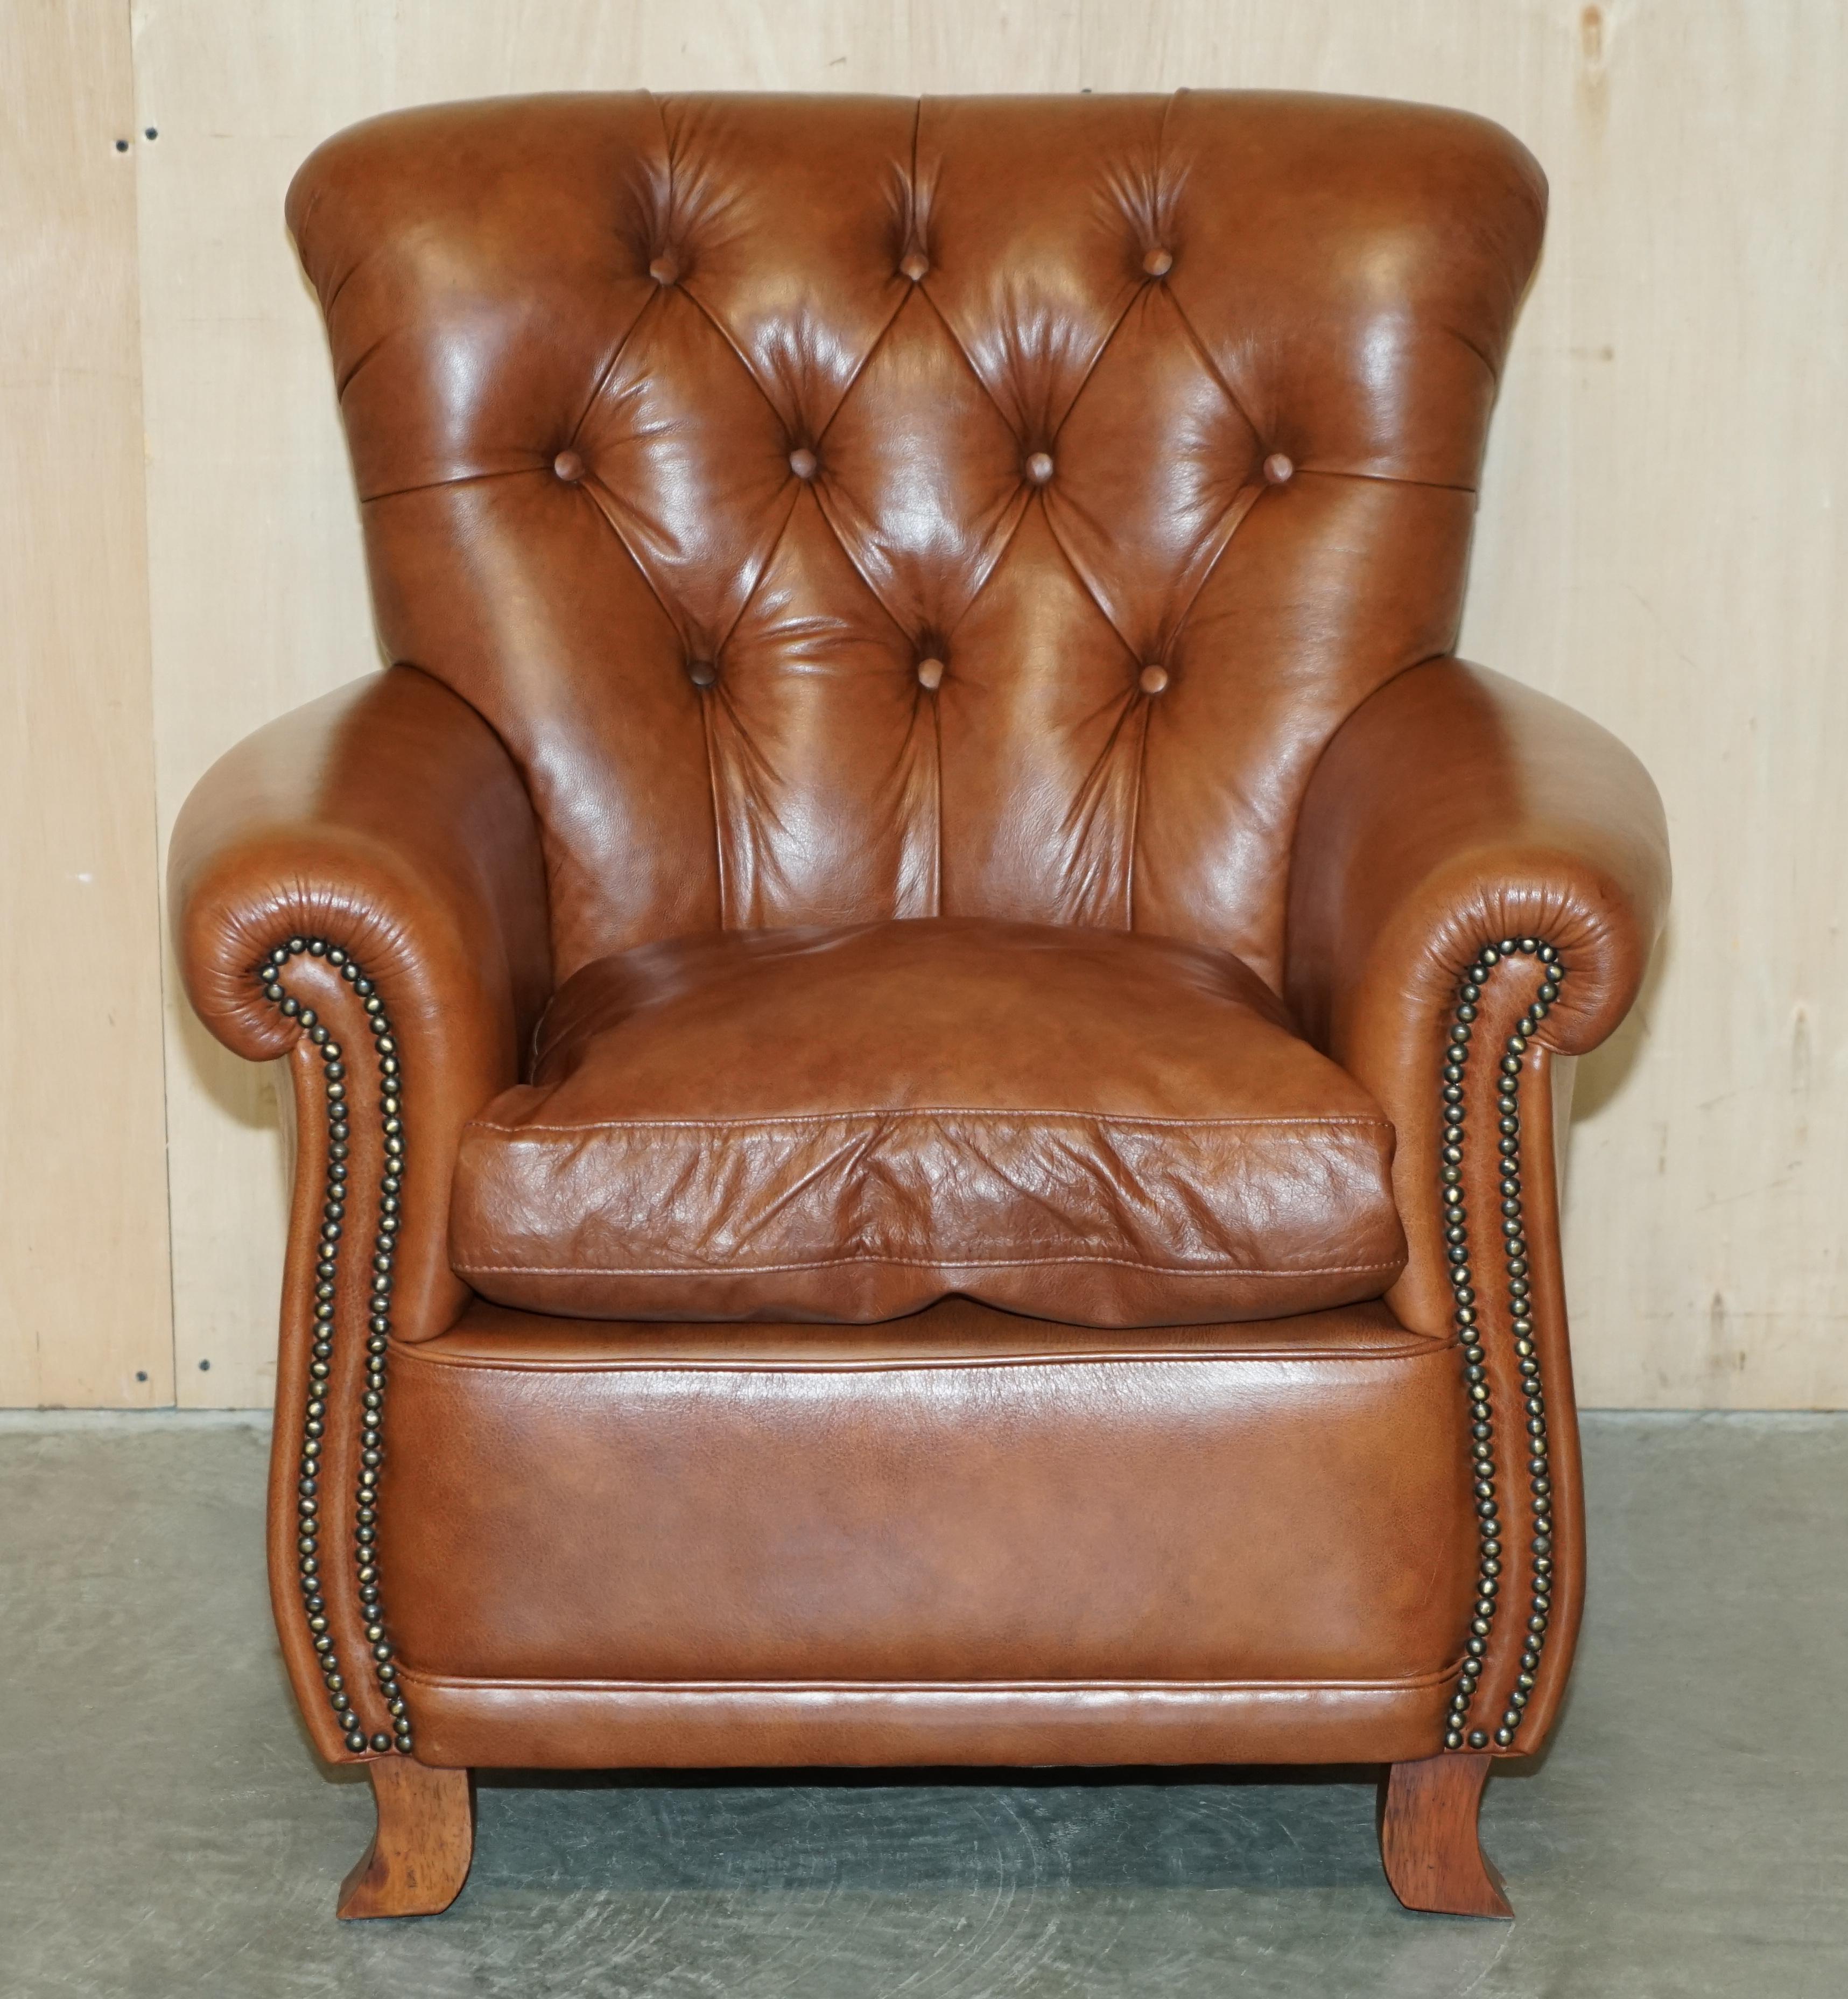 We are delighted to offer for sale this super comfortable, Tetrad hand made in England brown leather armchair and ottoman.

A very well made, decorative and extremely comfortable armchair and ottoman. This pair were discontinued some years ago,